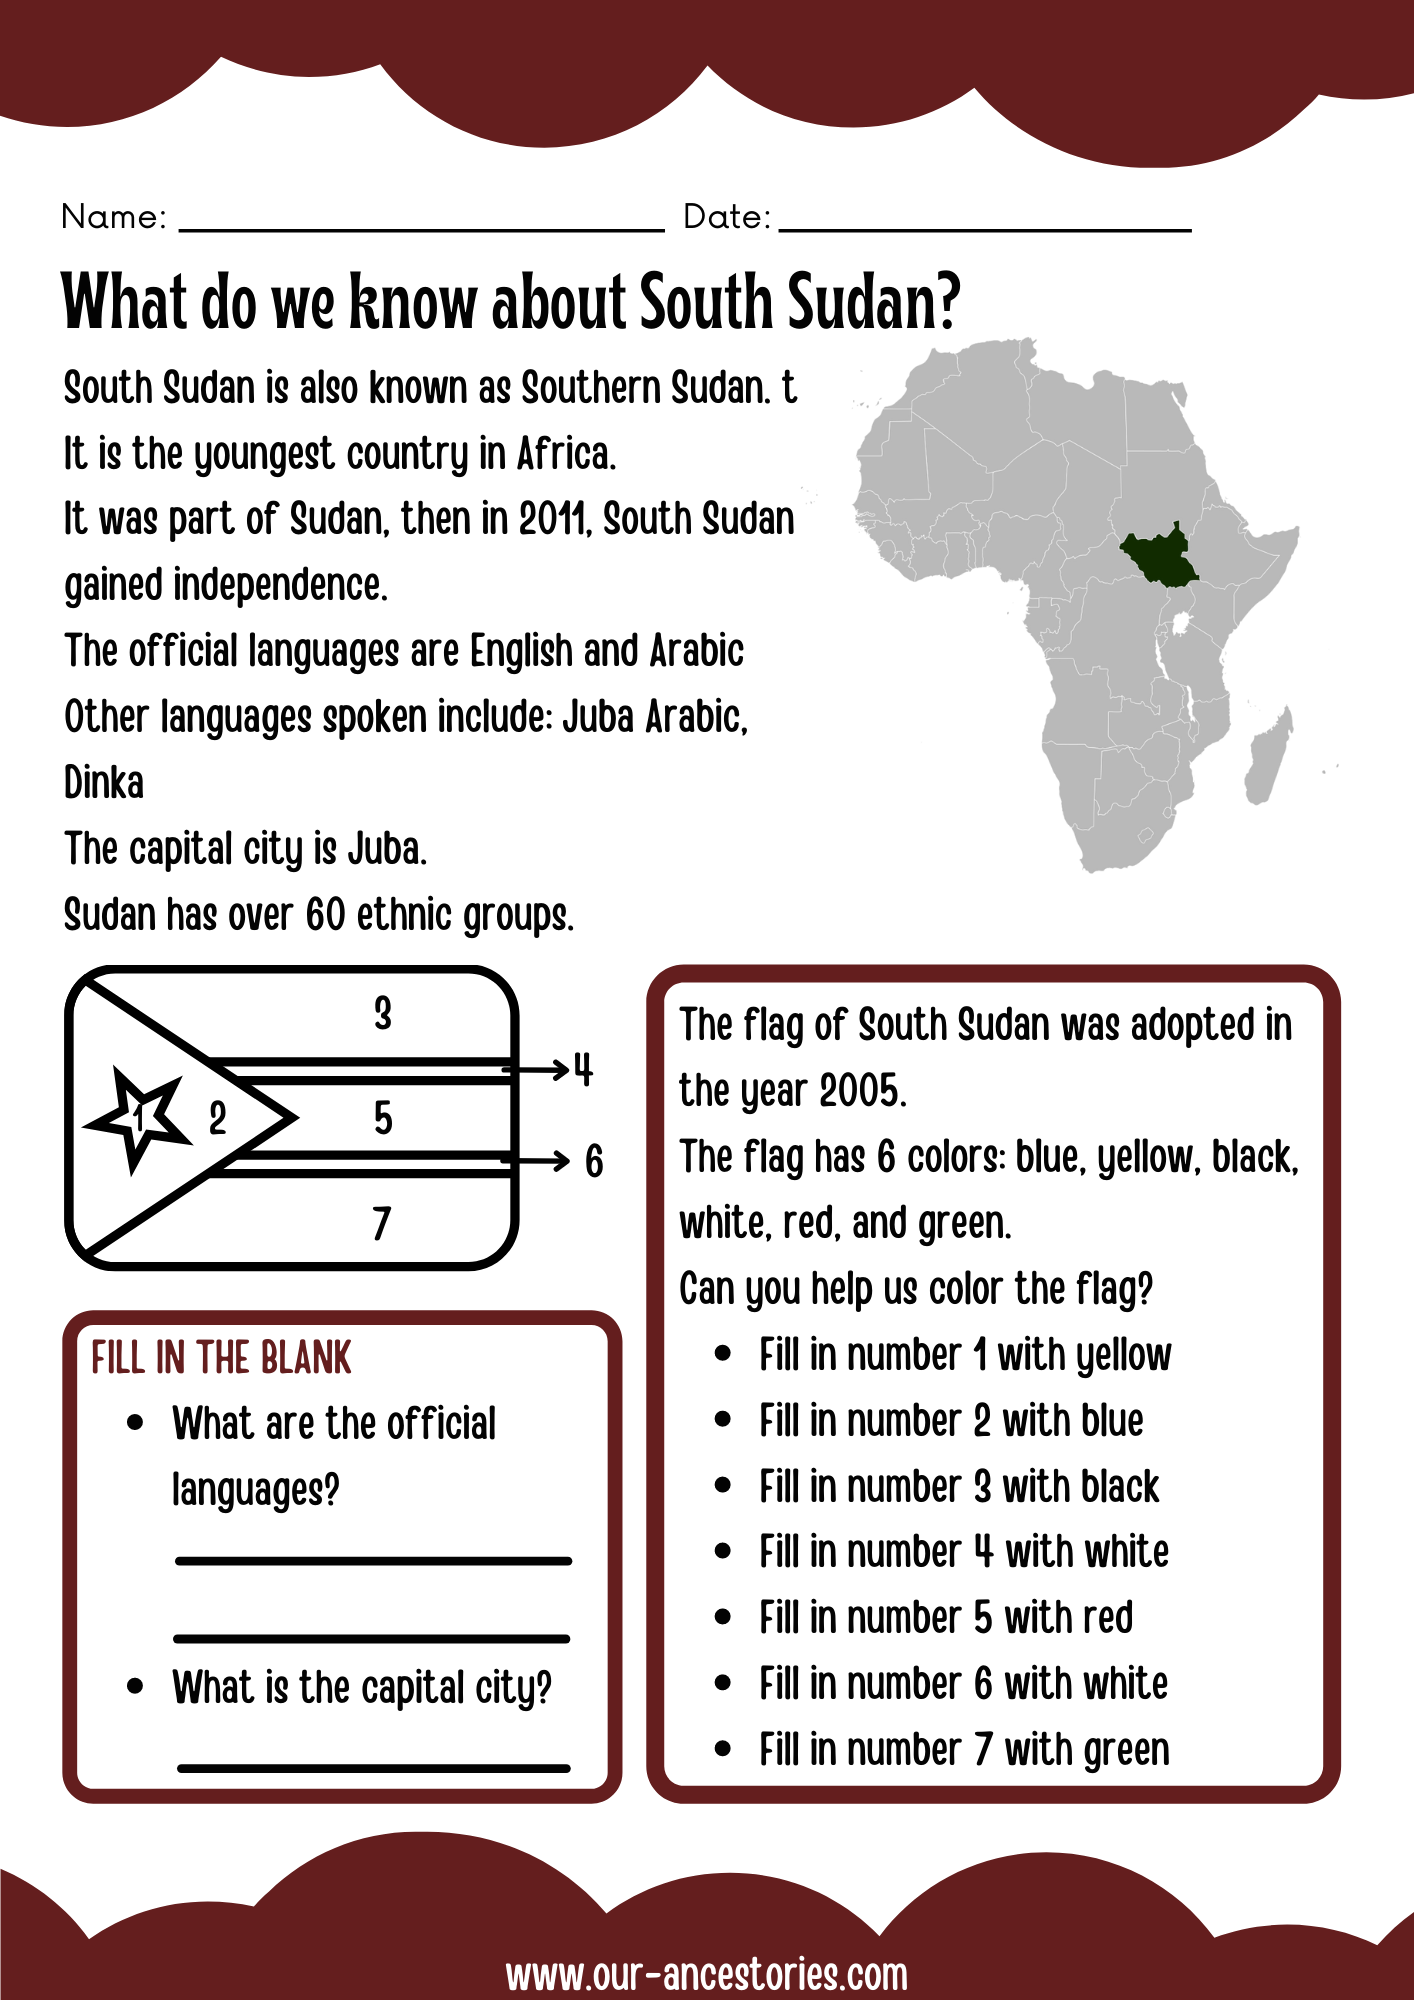 Our Ancestories - South Sudan Country Profile - Free Worksheets